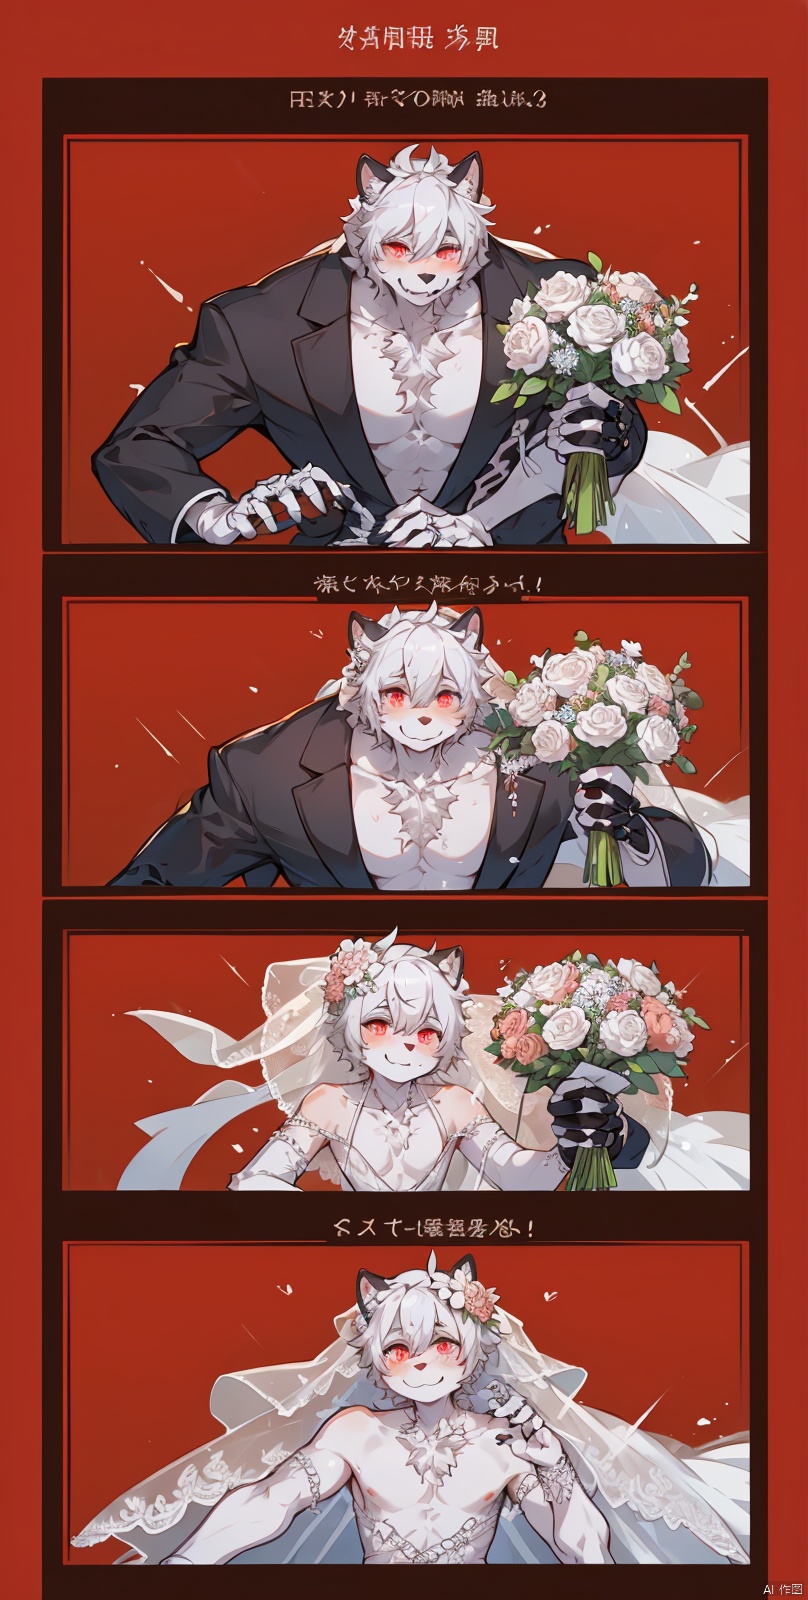  Skeleton Bride, Holding flowers in the hand, Wearing a wedding dress, Wait at the cemetery, So many details., hell, blackmagic, macron, solid eyes, xinniang, cutegui, wulian, red background, shota, furry